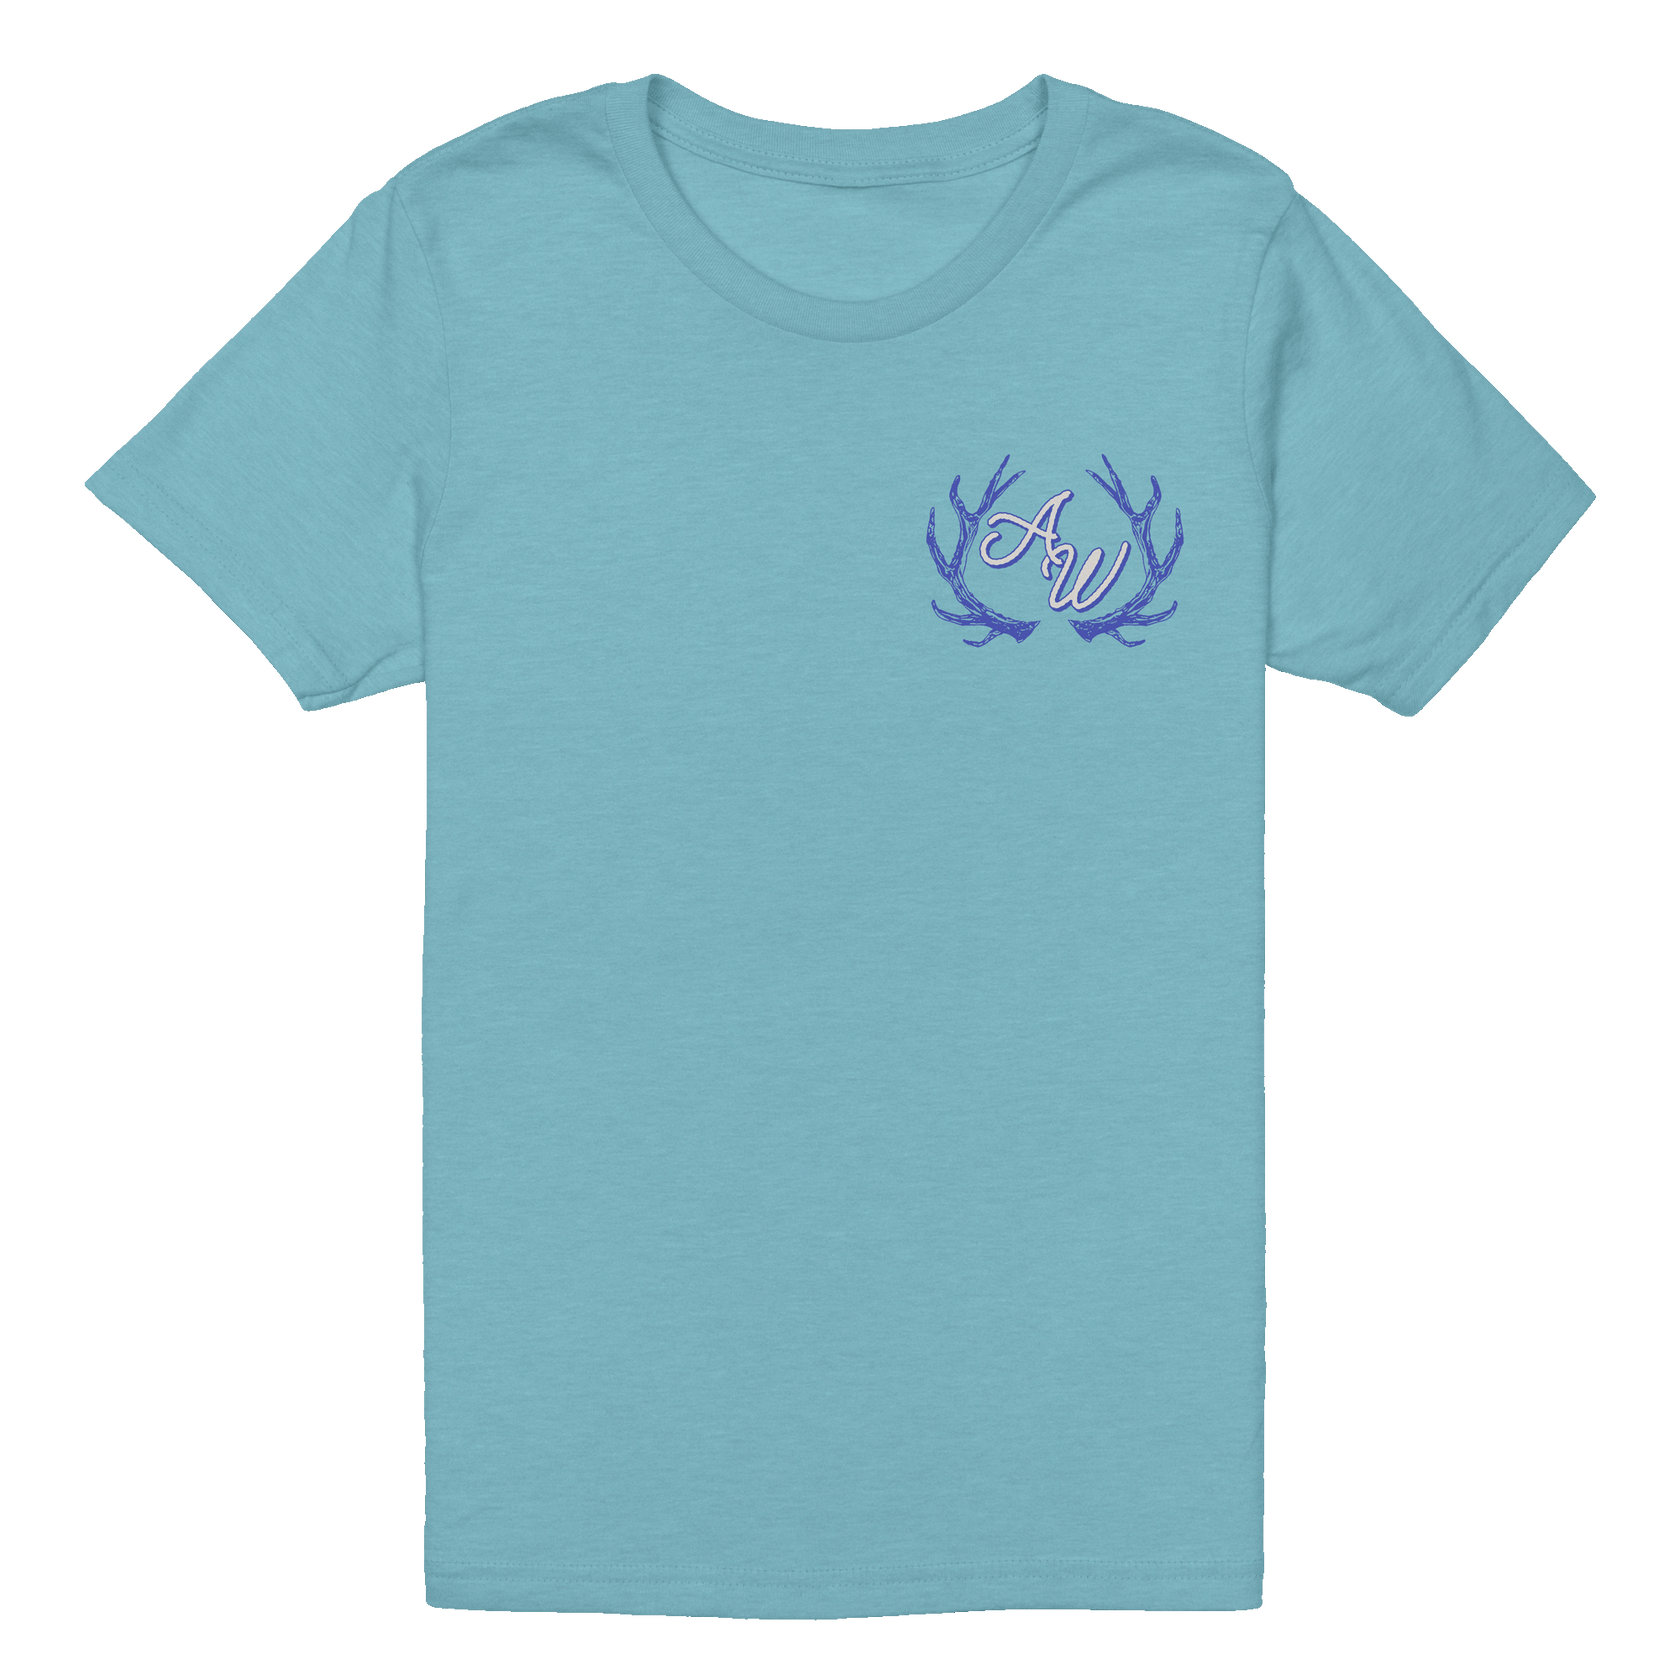 Hey Girl Boot YOUTH Tee - Heather Blue – Anne Wilson Official